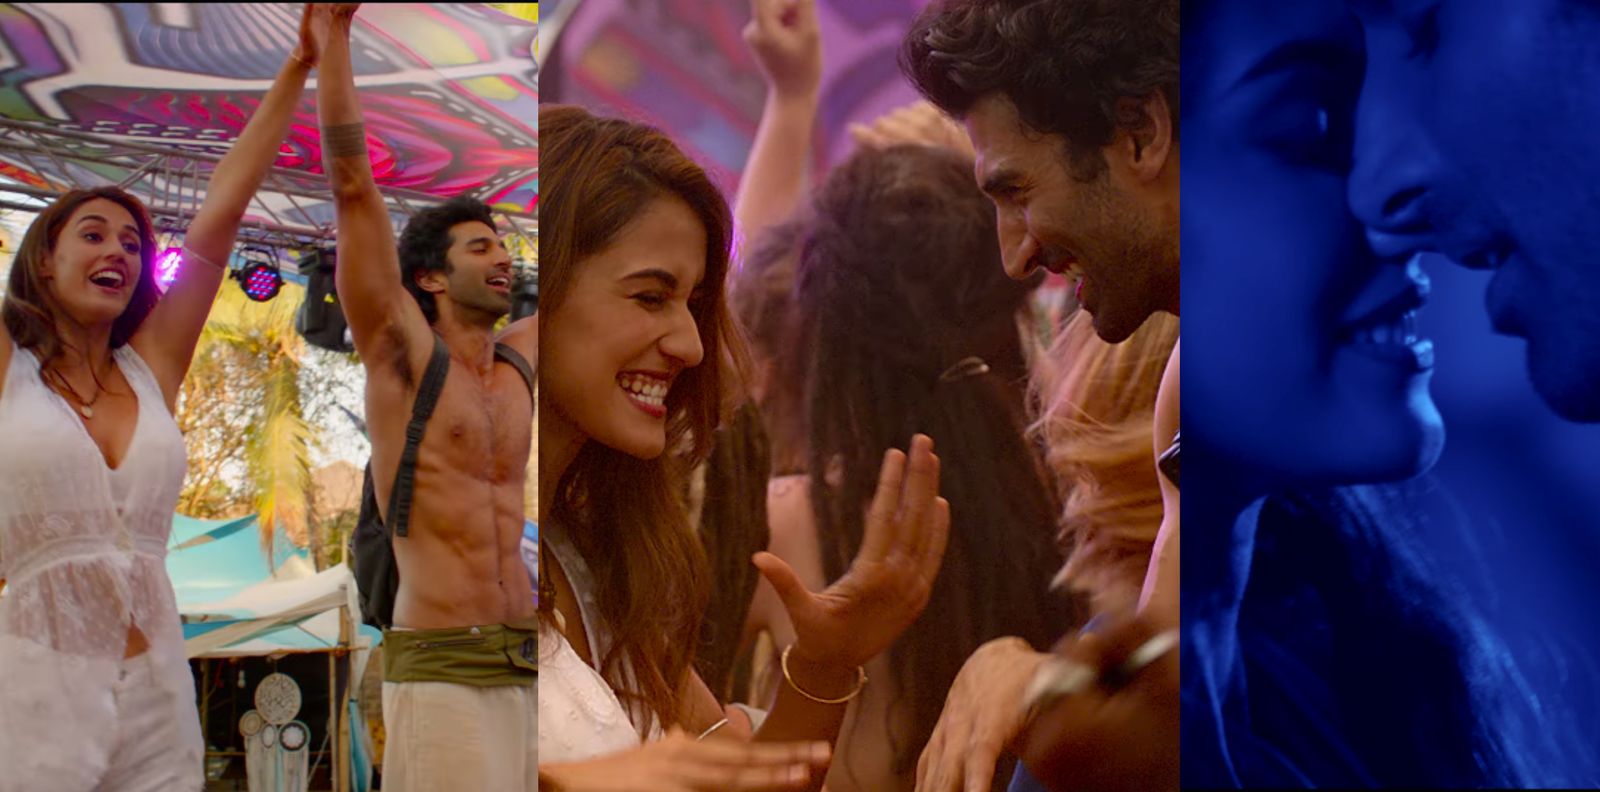 Malang’s Humraah Song: Aditya Roy Kapoor And Disha Patani's Romance Would Make You Want To Take An Adventurous Vacay With Your Loved One, RN!